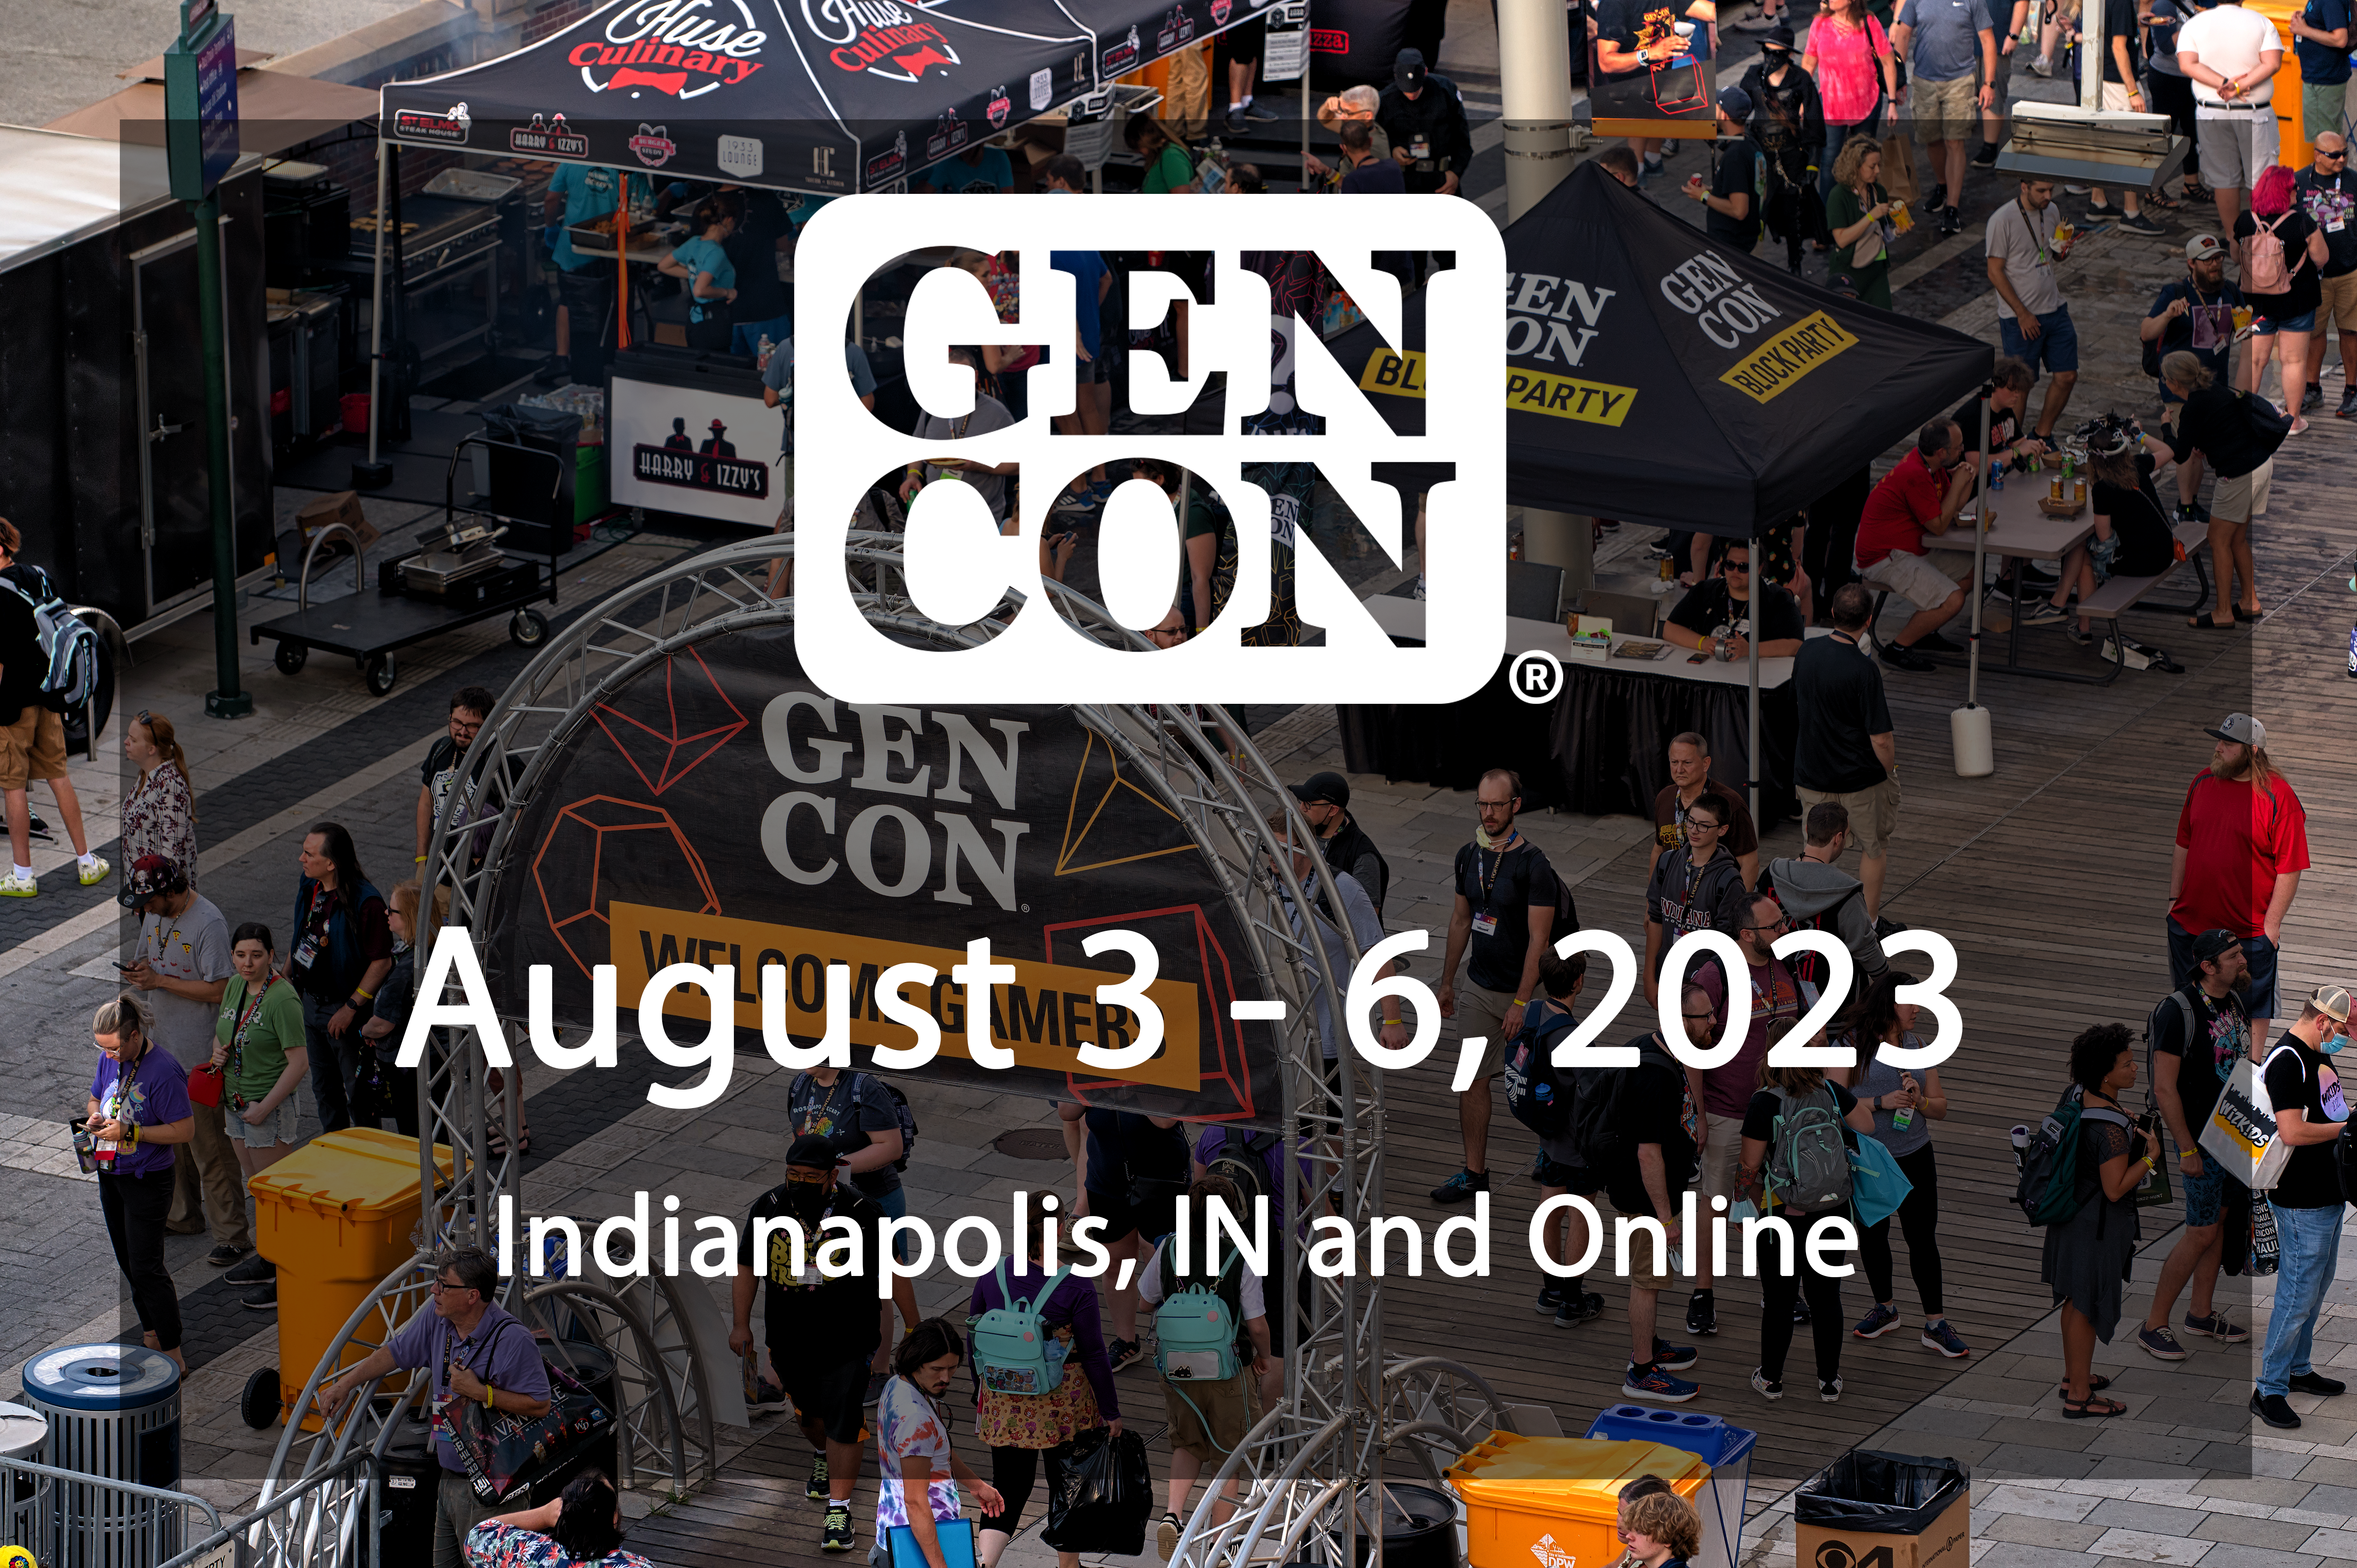 a photo of people looking around the GenCon dealer's room full of publishers' booths. The foreground contains the GenCon logo and says, "August 3 - 6, 2023. Indianapolis, IN and Online."